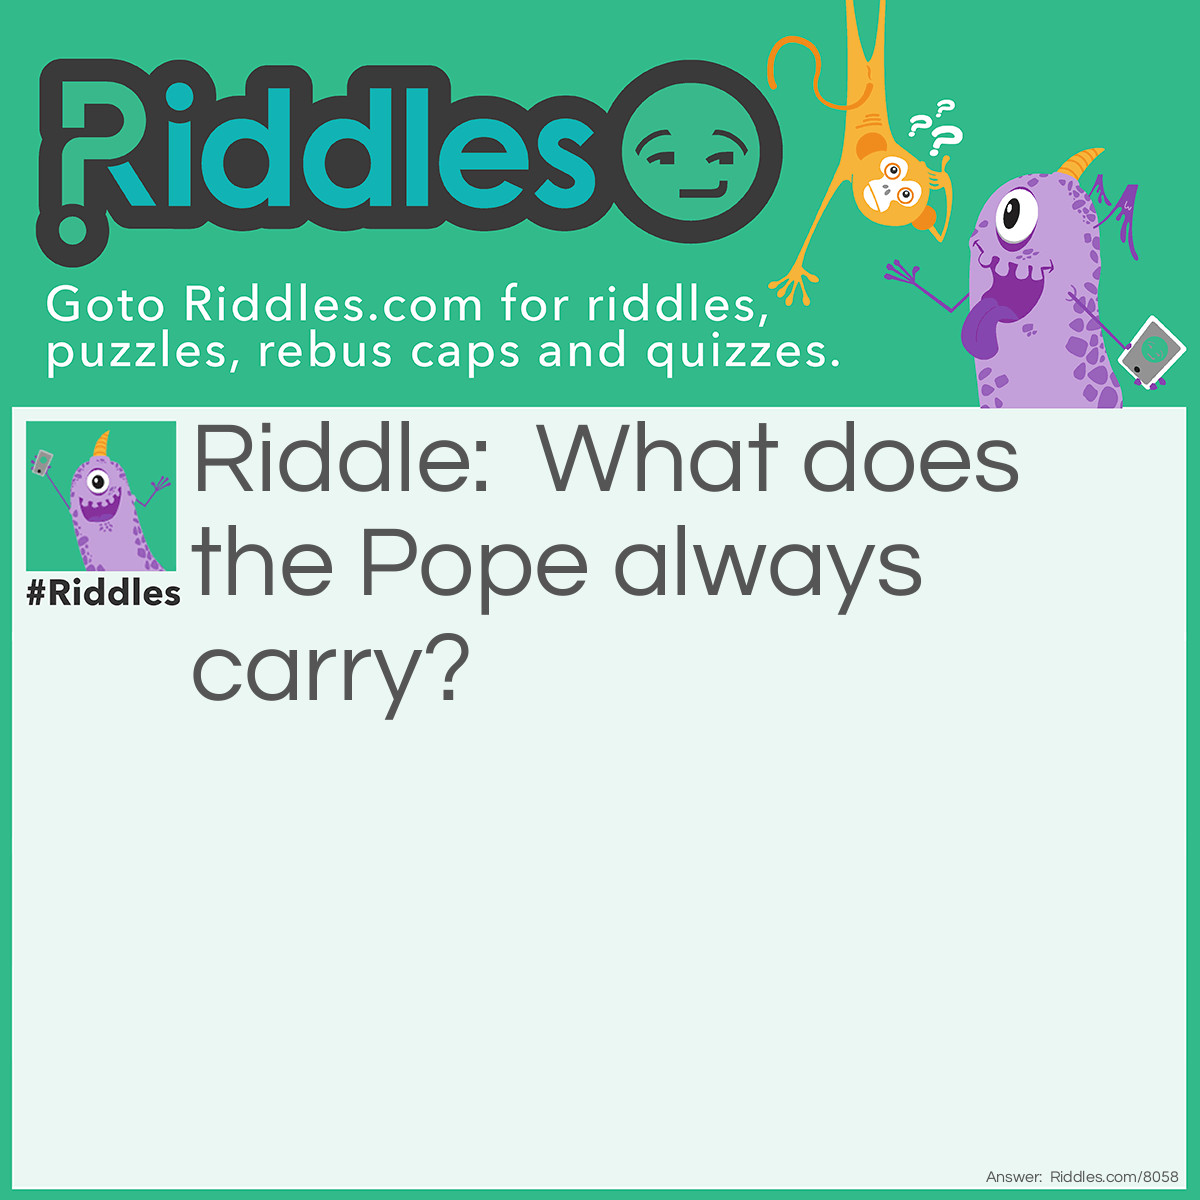 Riddle: What does the Pope always carry? Answer: A cross necklace.